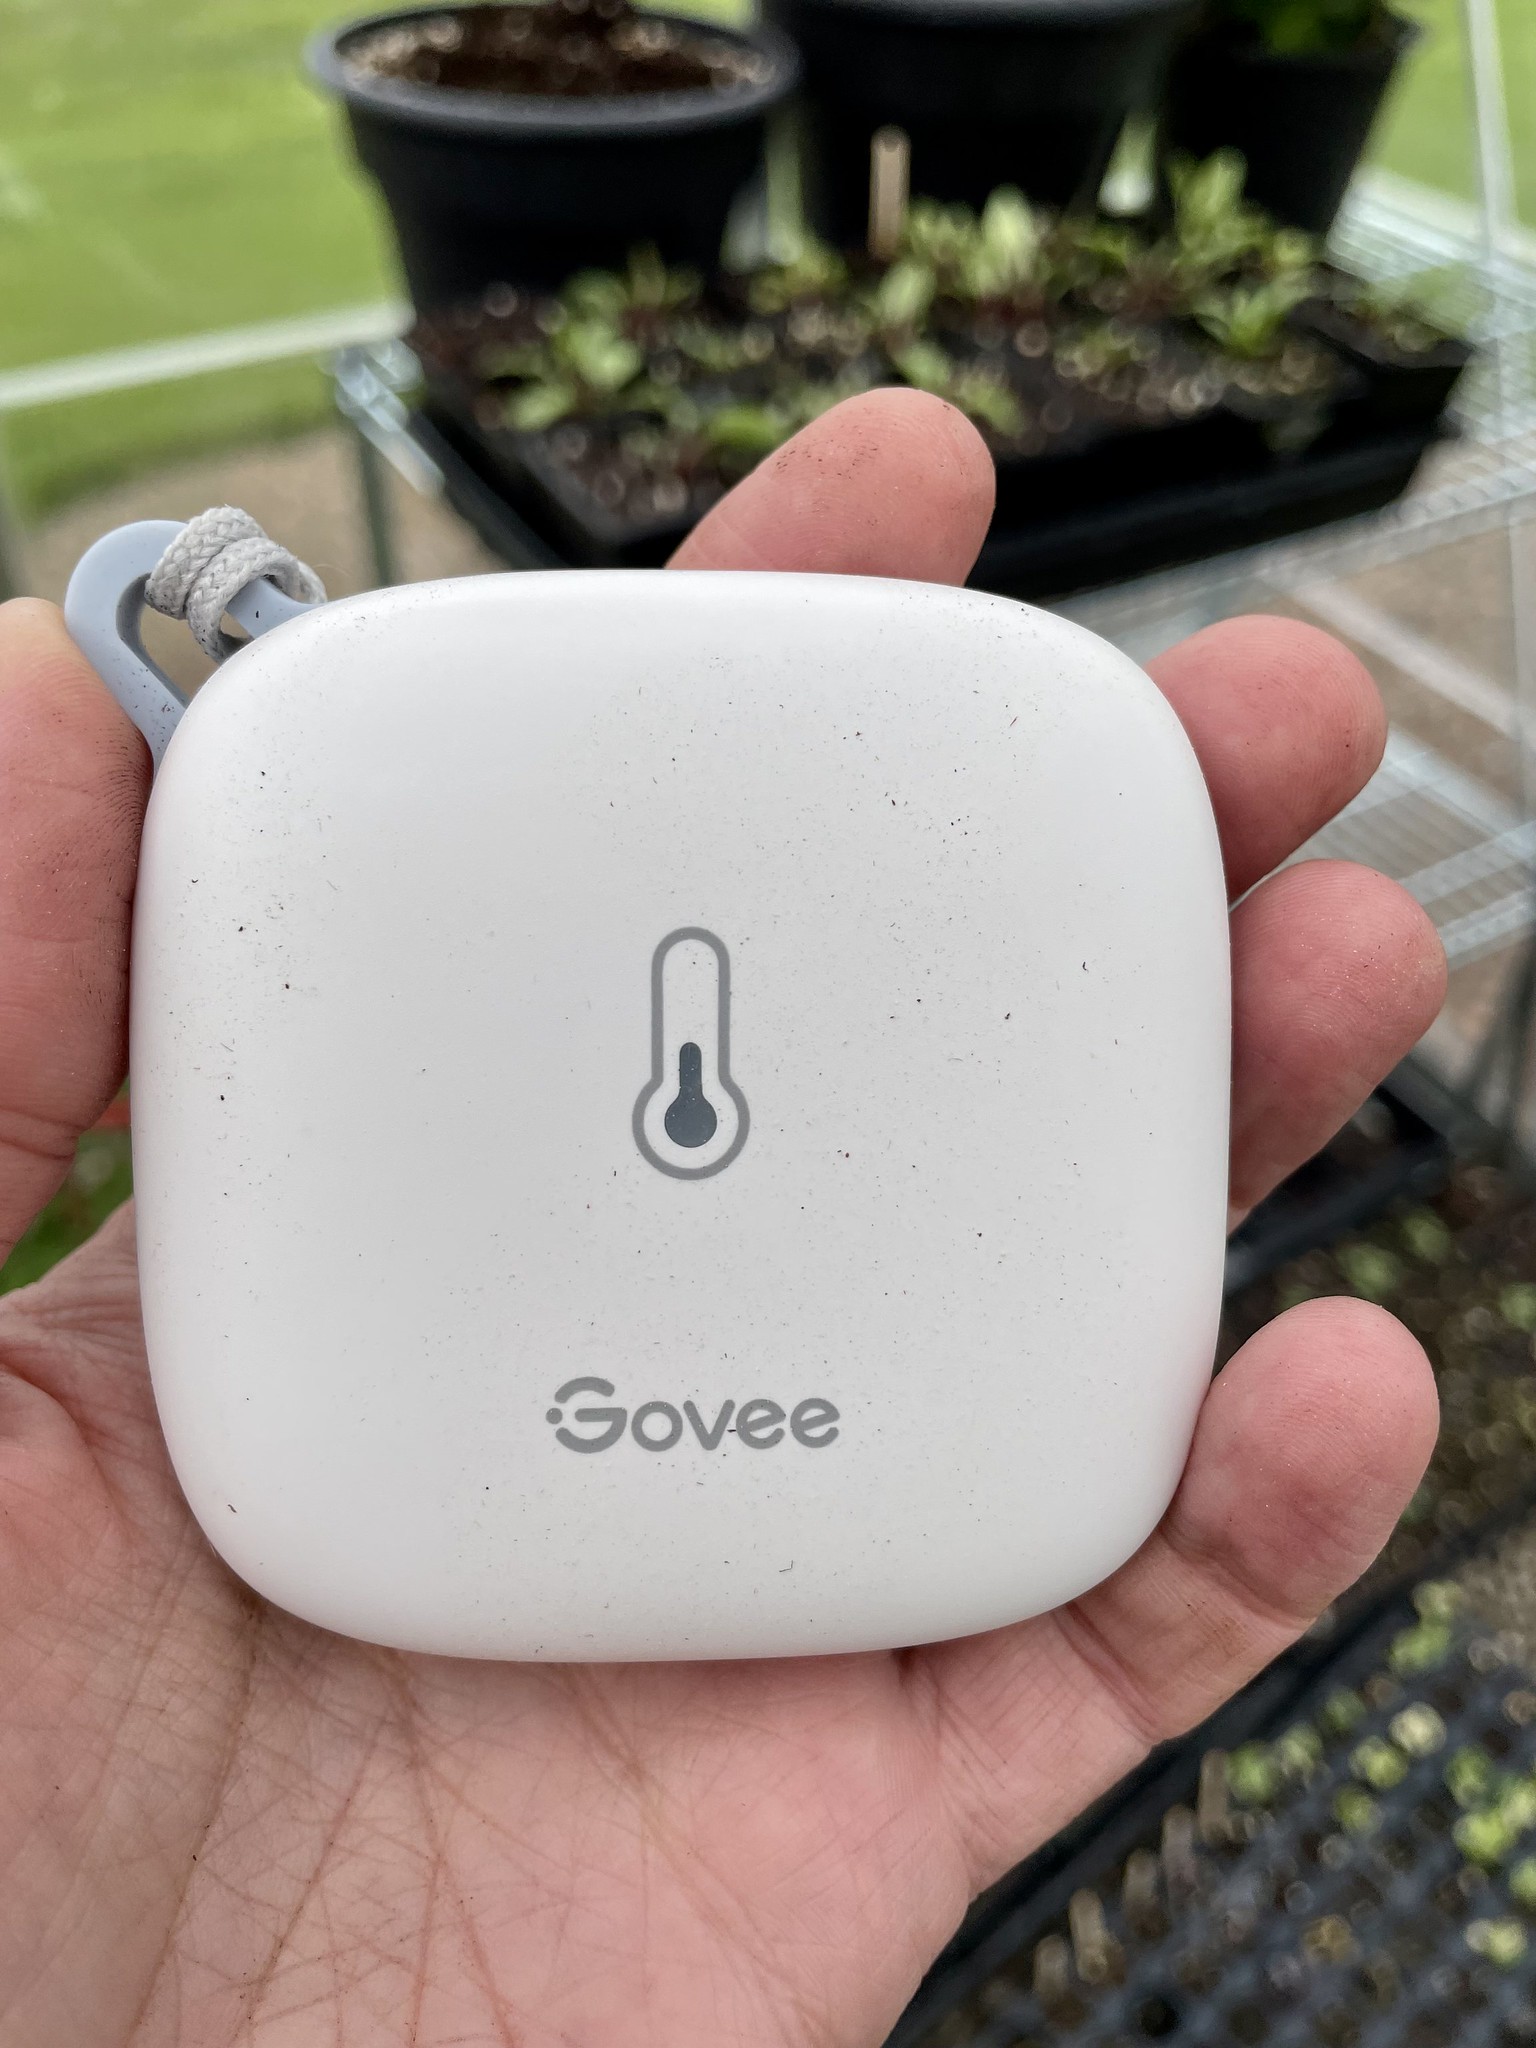 No More Dead Plants, with The Govee Wi-Fi Temperature and Humidity